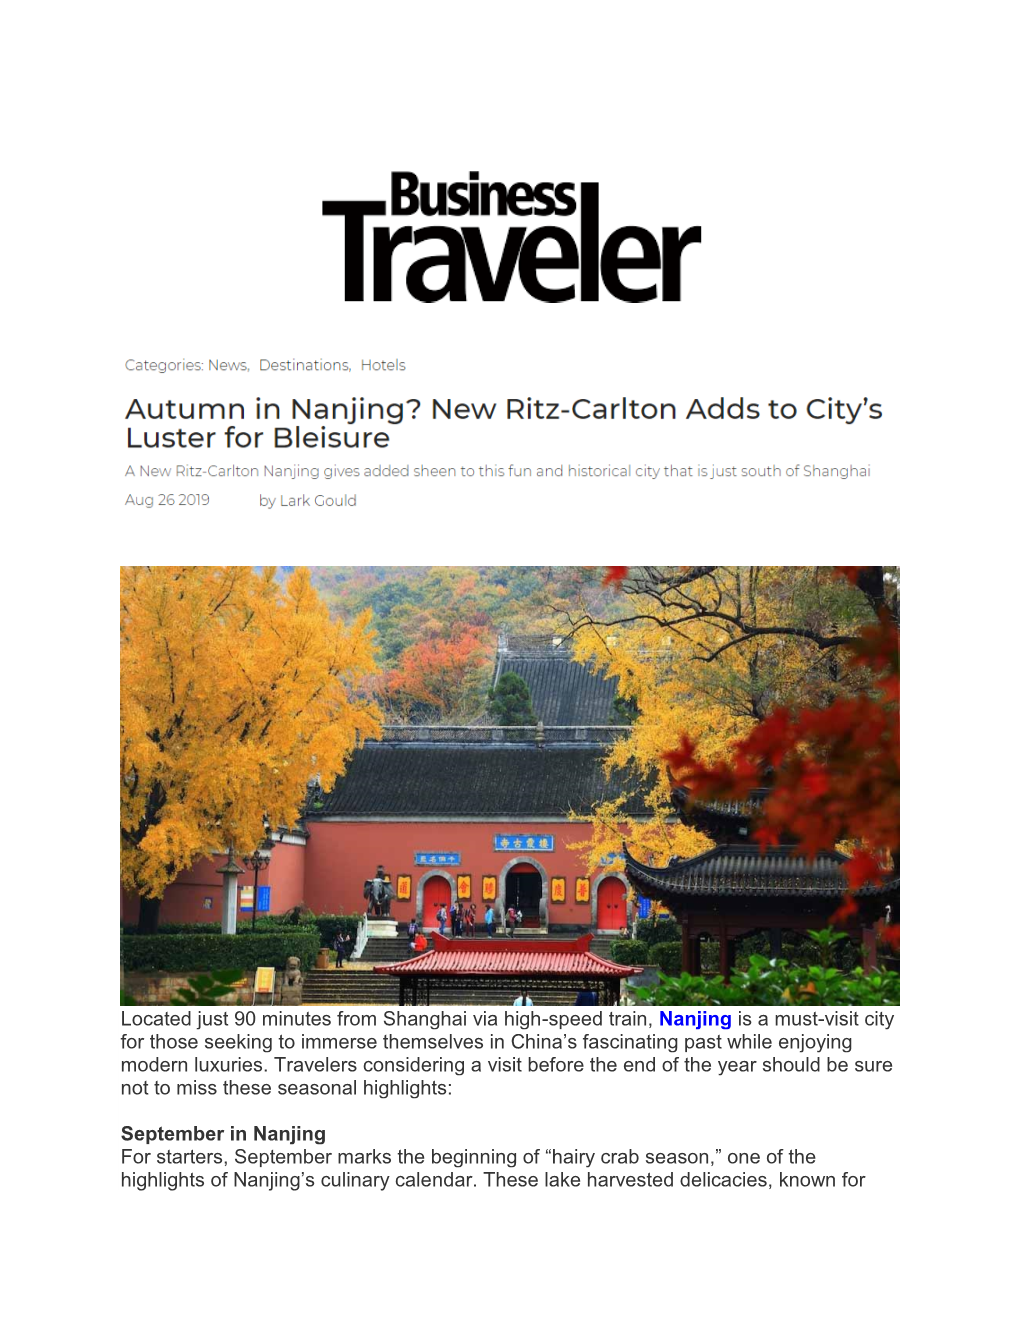 Business Insider: Autumn in Nanjing?